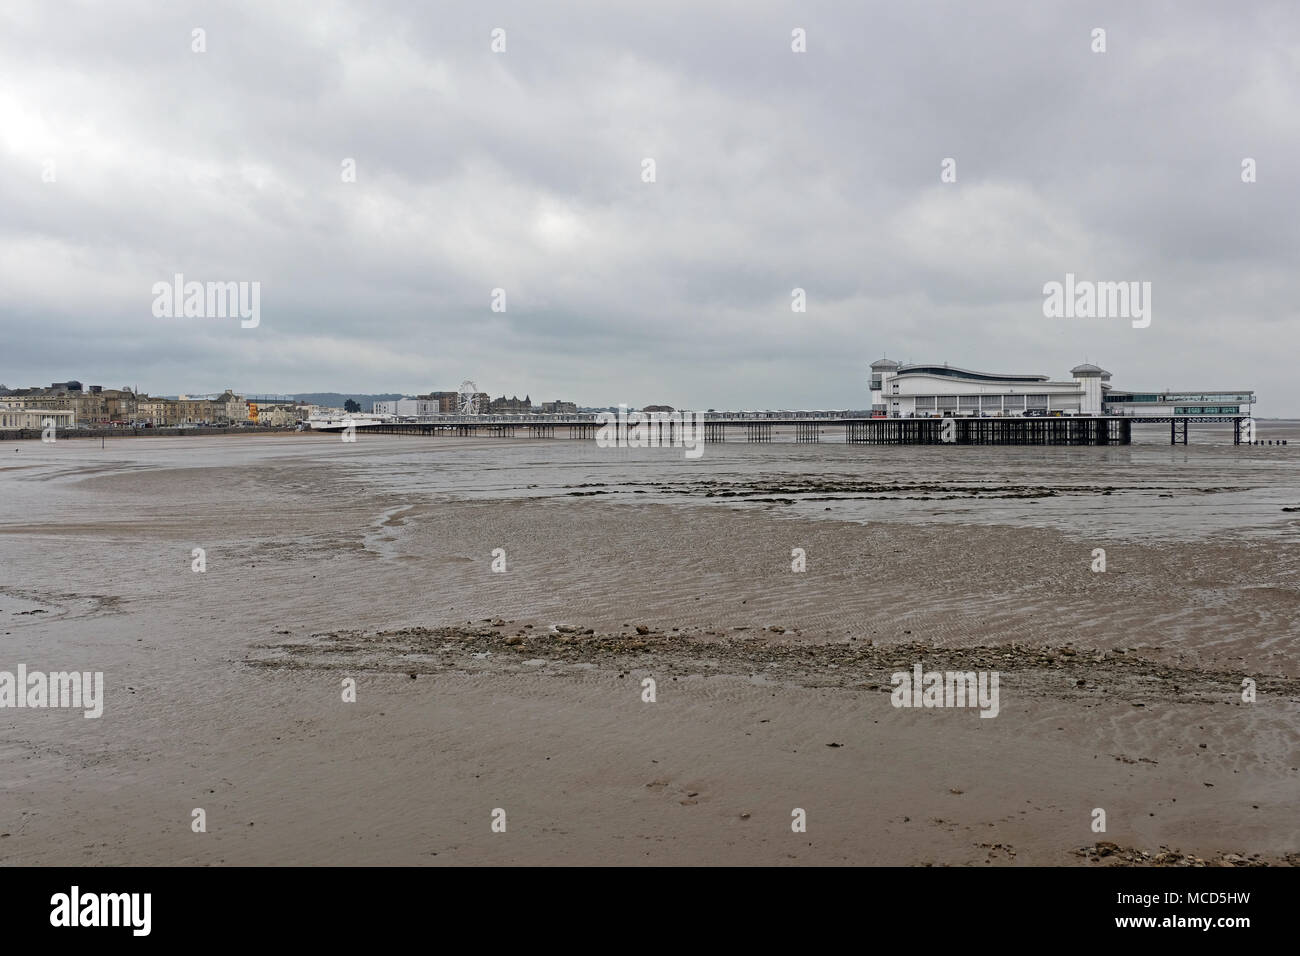 Weston-super-Mare, UK. 16th April, 2018. UK weather: an almost deserted beach on an overcast, breezy, showery spring afternoon. Keith Ramsey/Alamy Live News Stock Photo